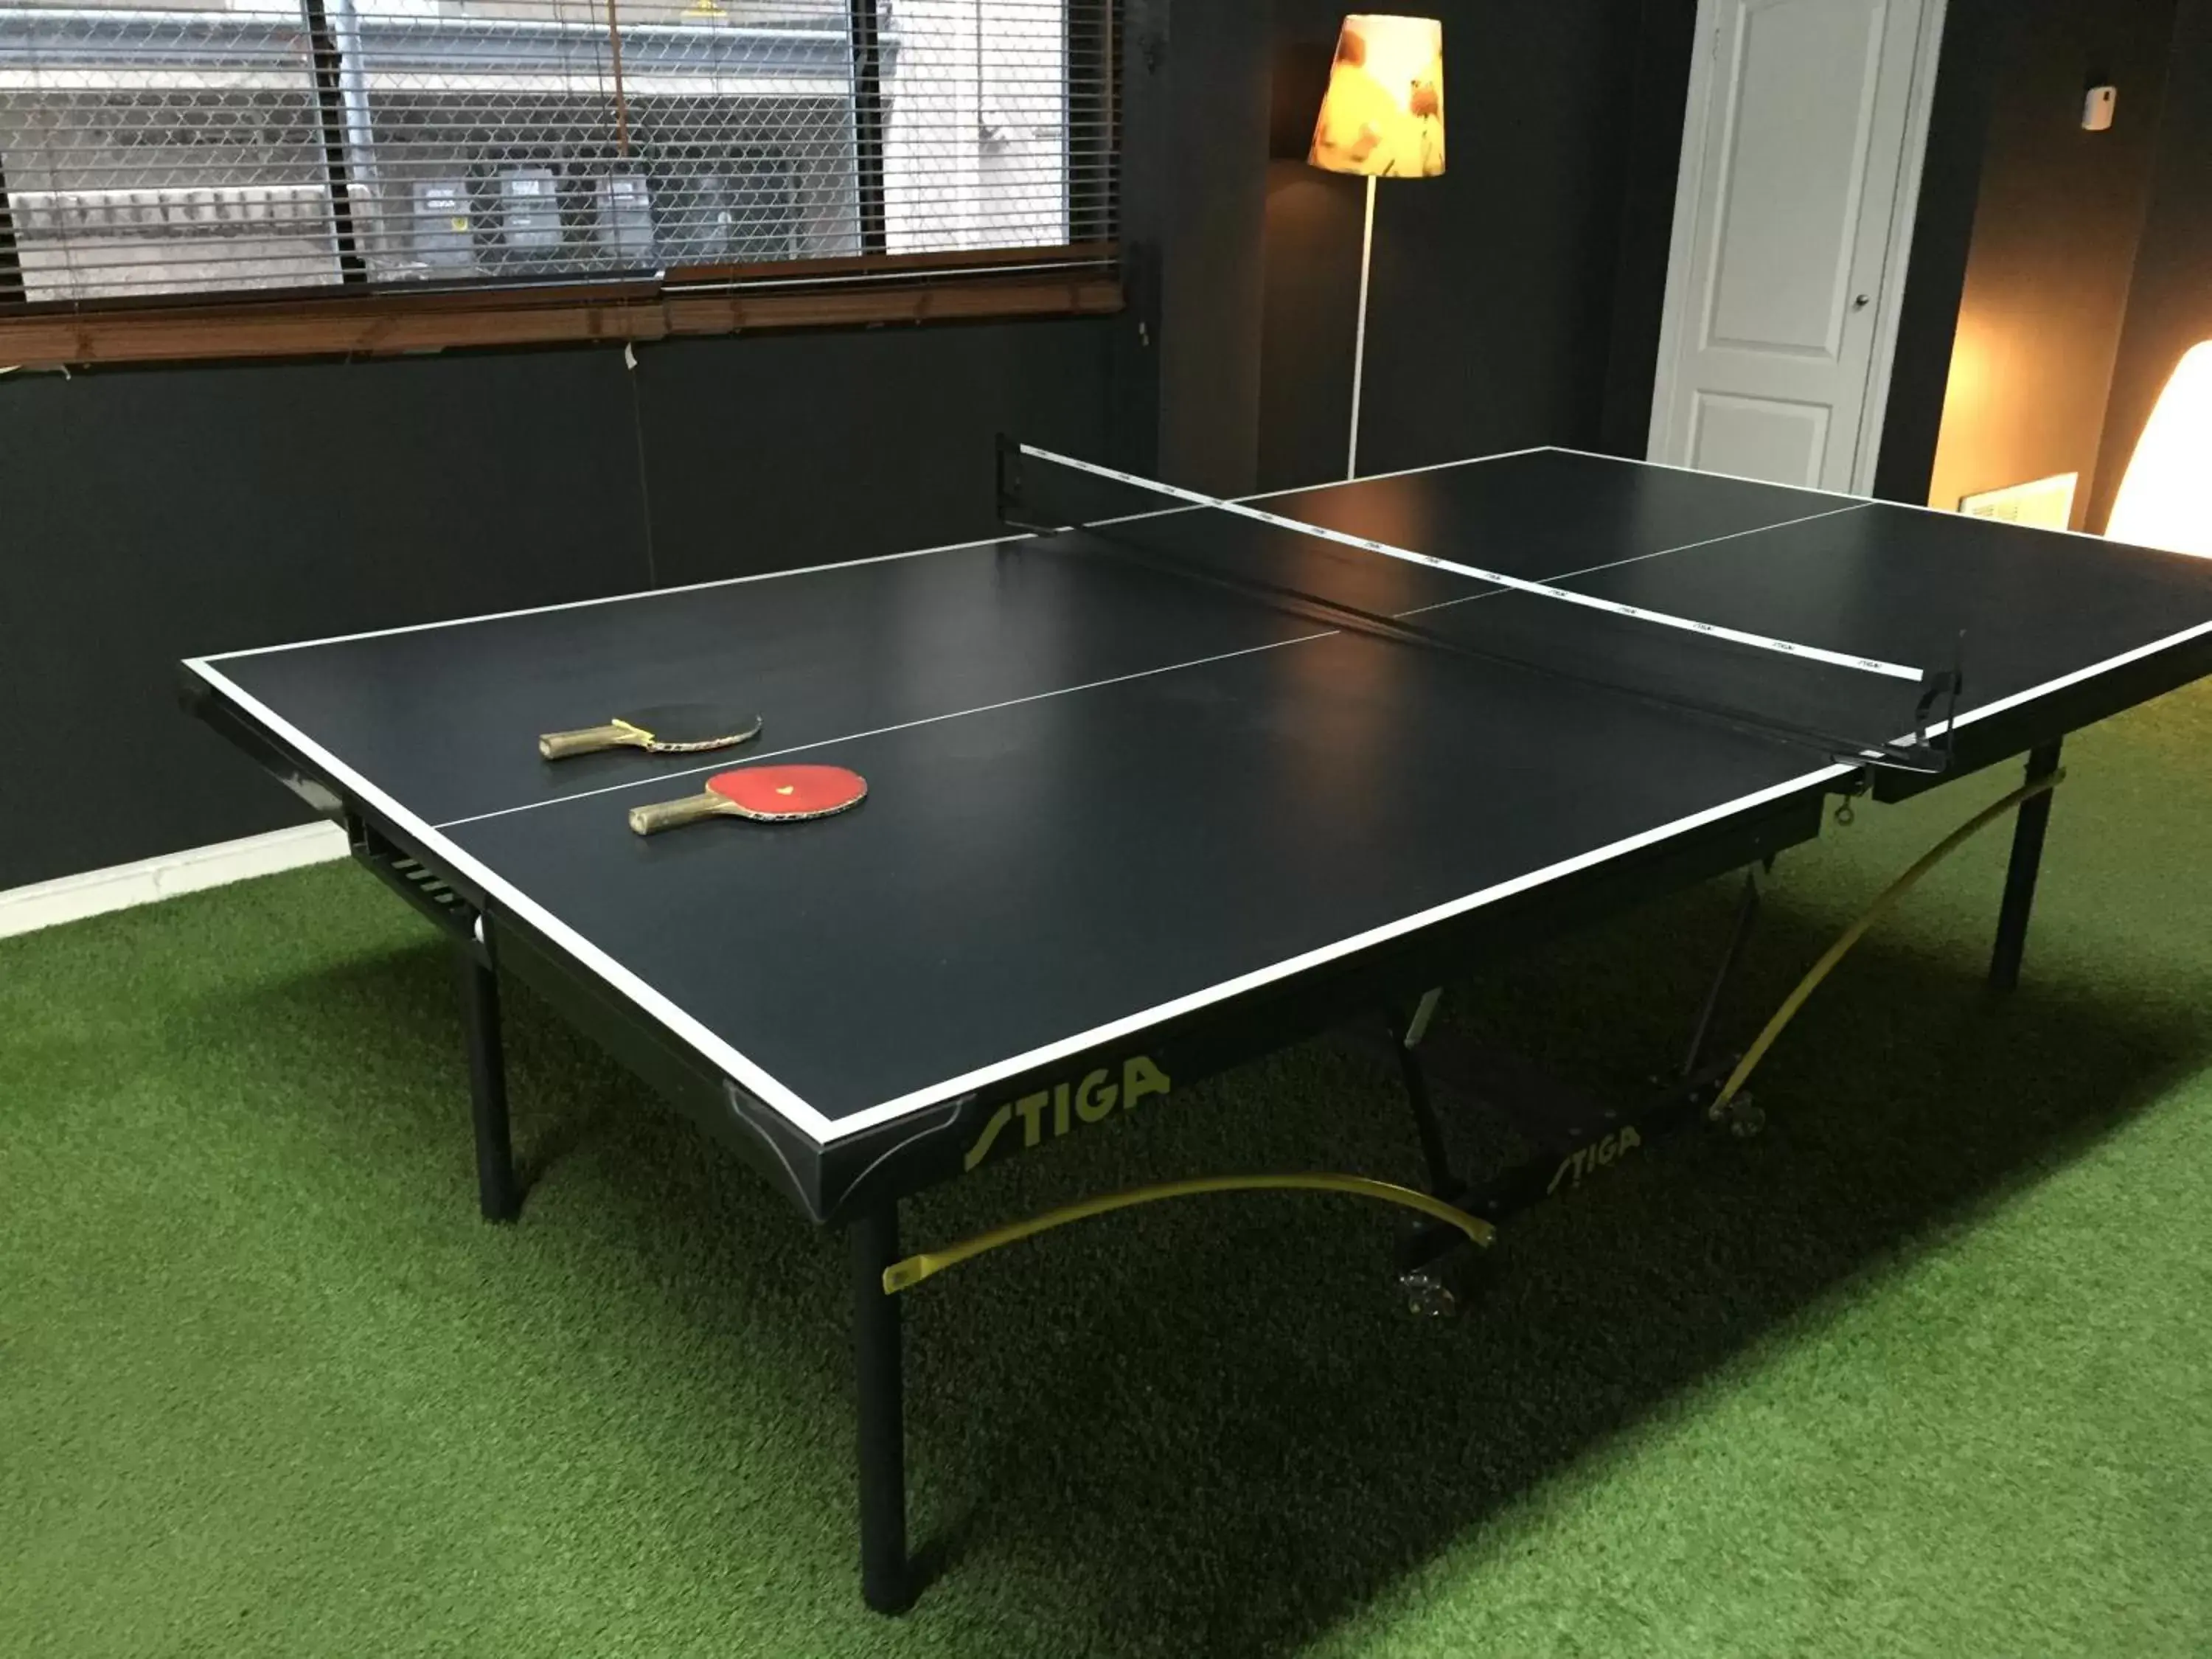 Game Room, Table Tennis in Shelter Hotel Los Angeles